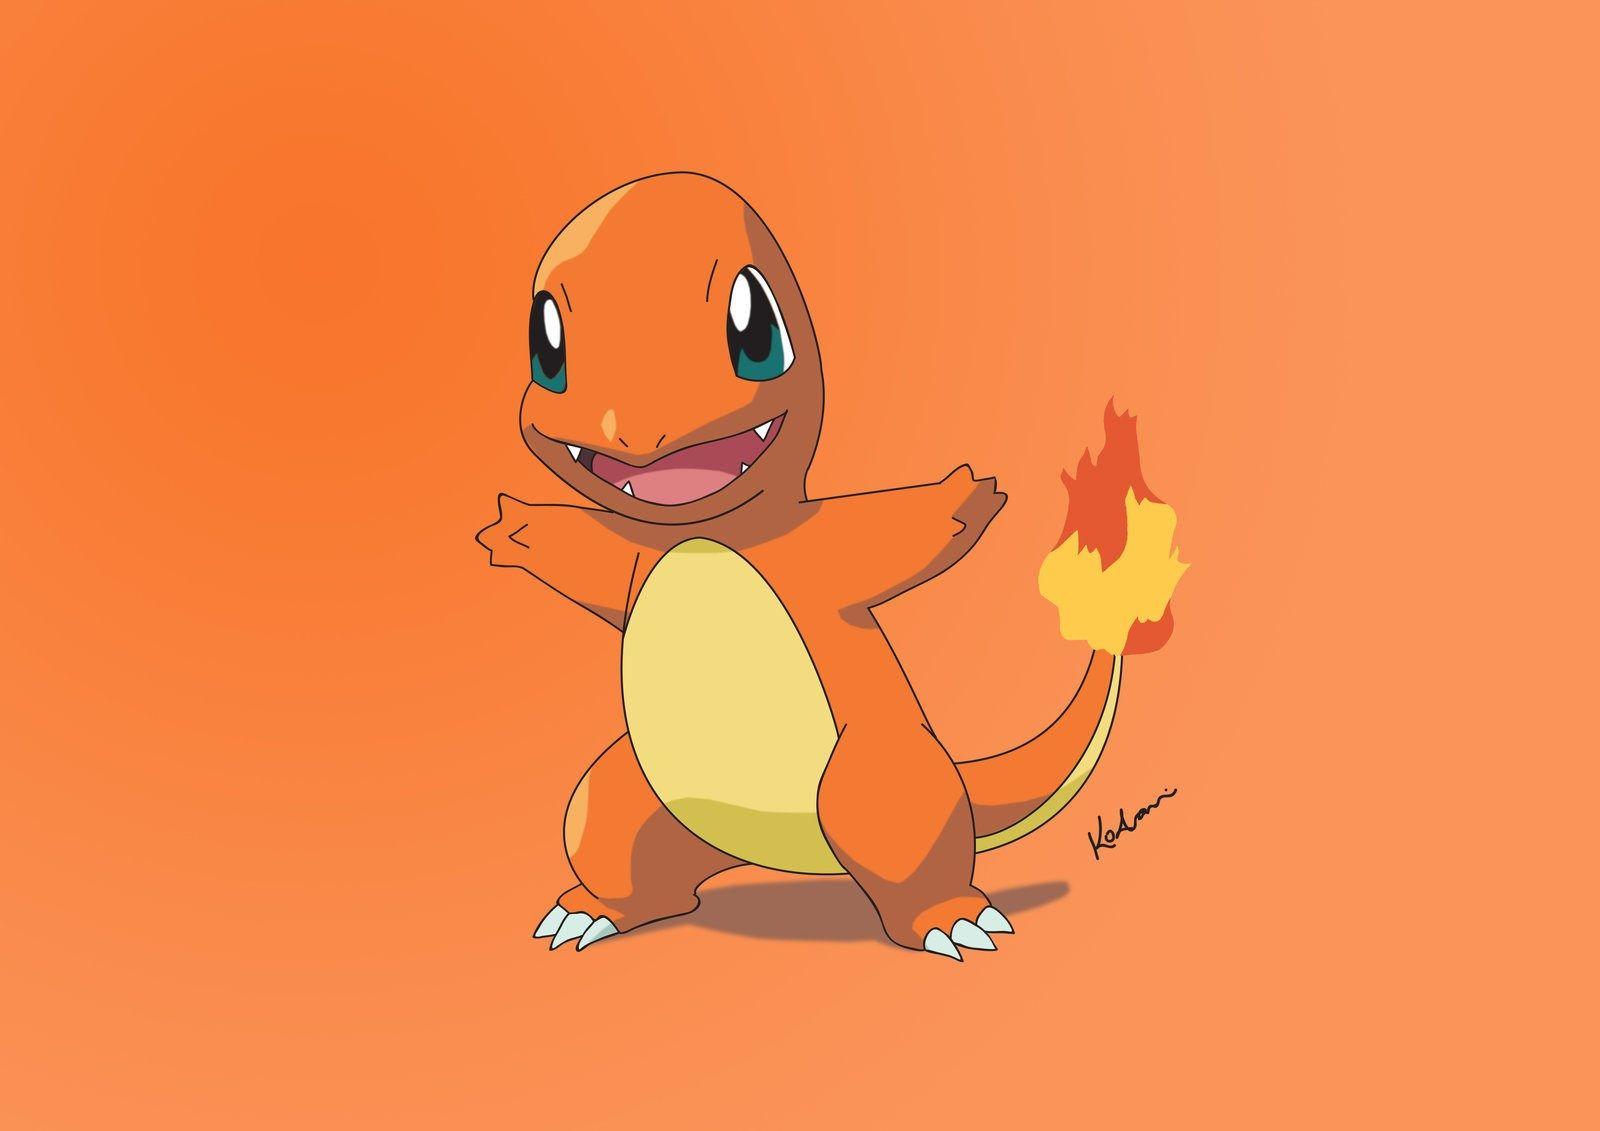 Charmander Wallpapers - Hd wallpapers and background images. - antik ...